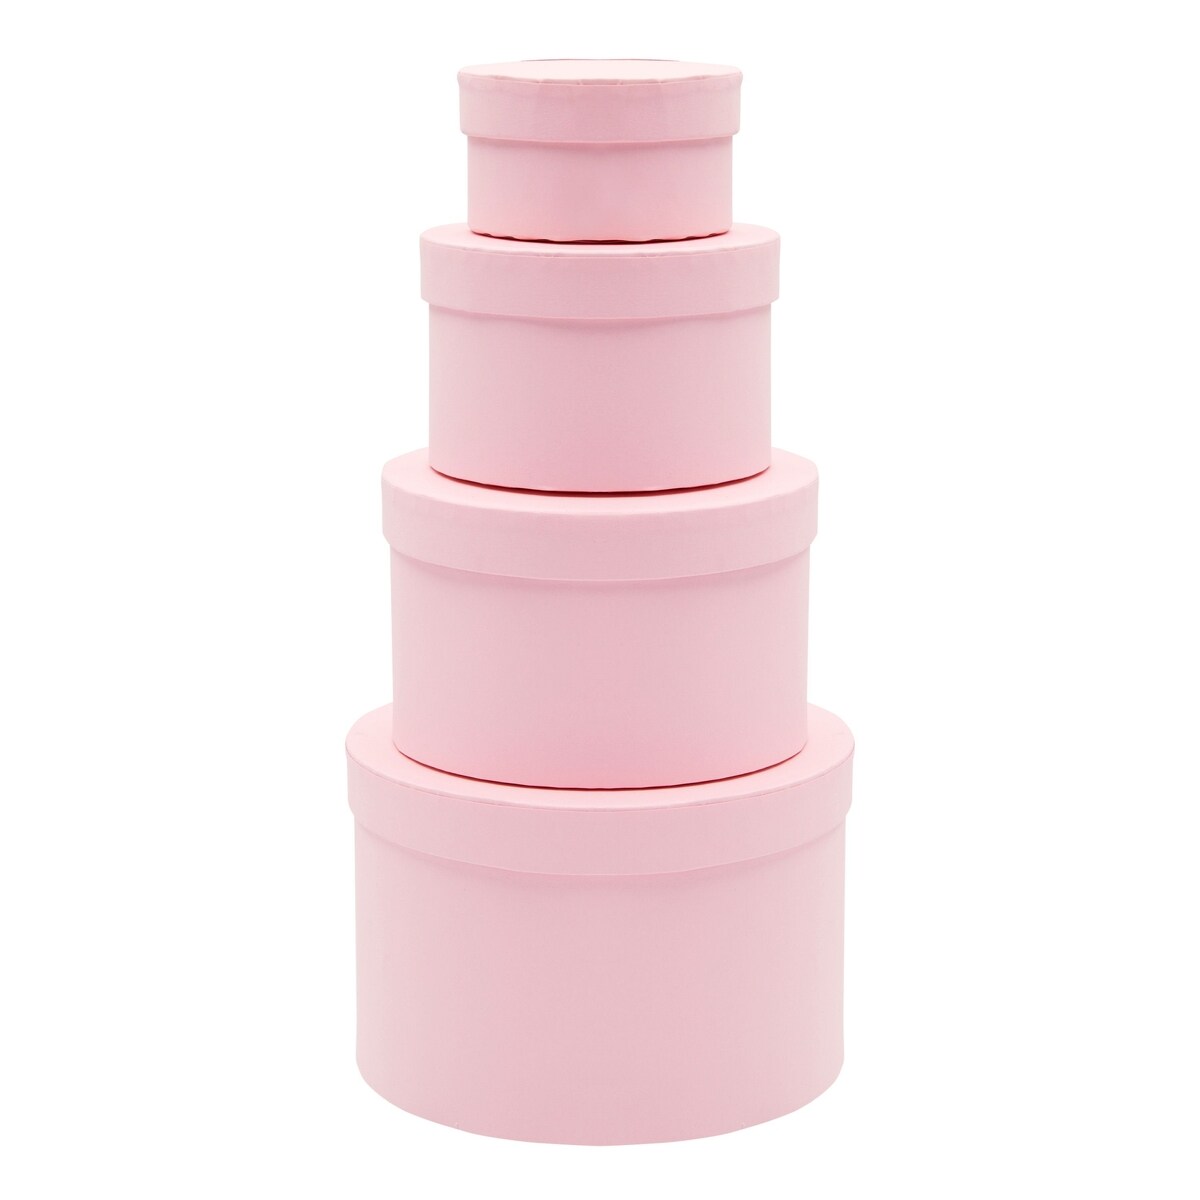 Set of 4 Round Nesting Gift Boxes with Lids, Small Circular